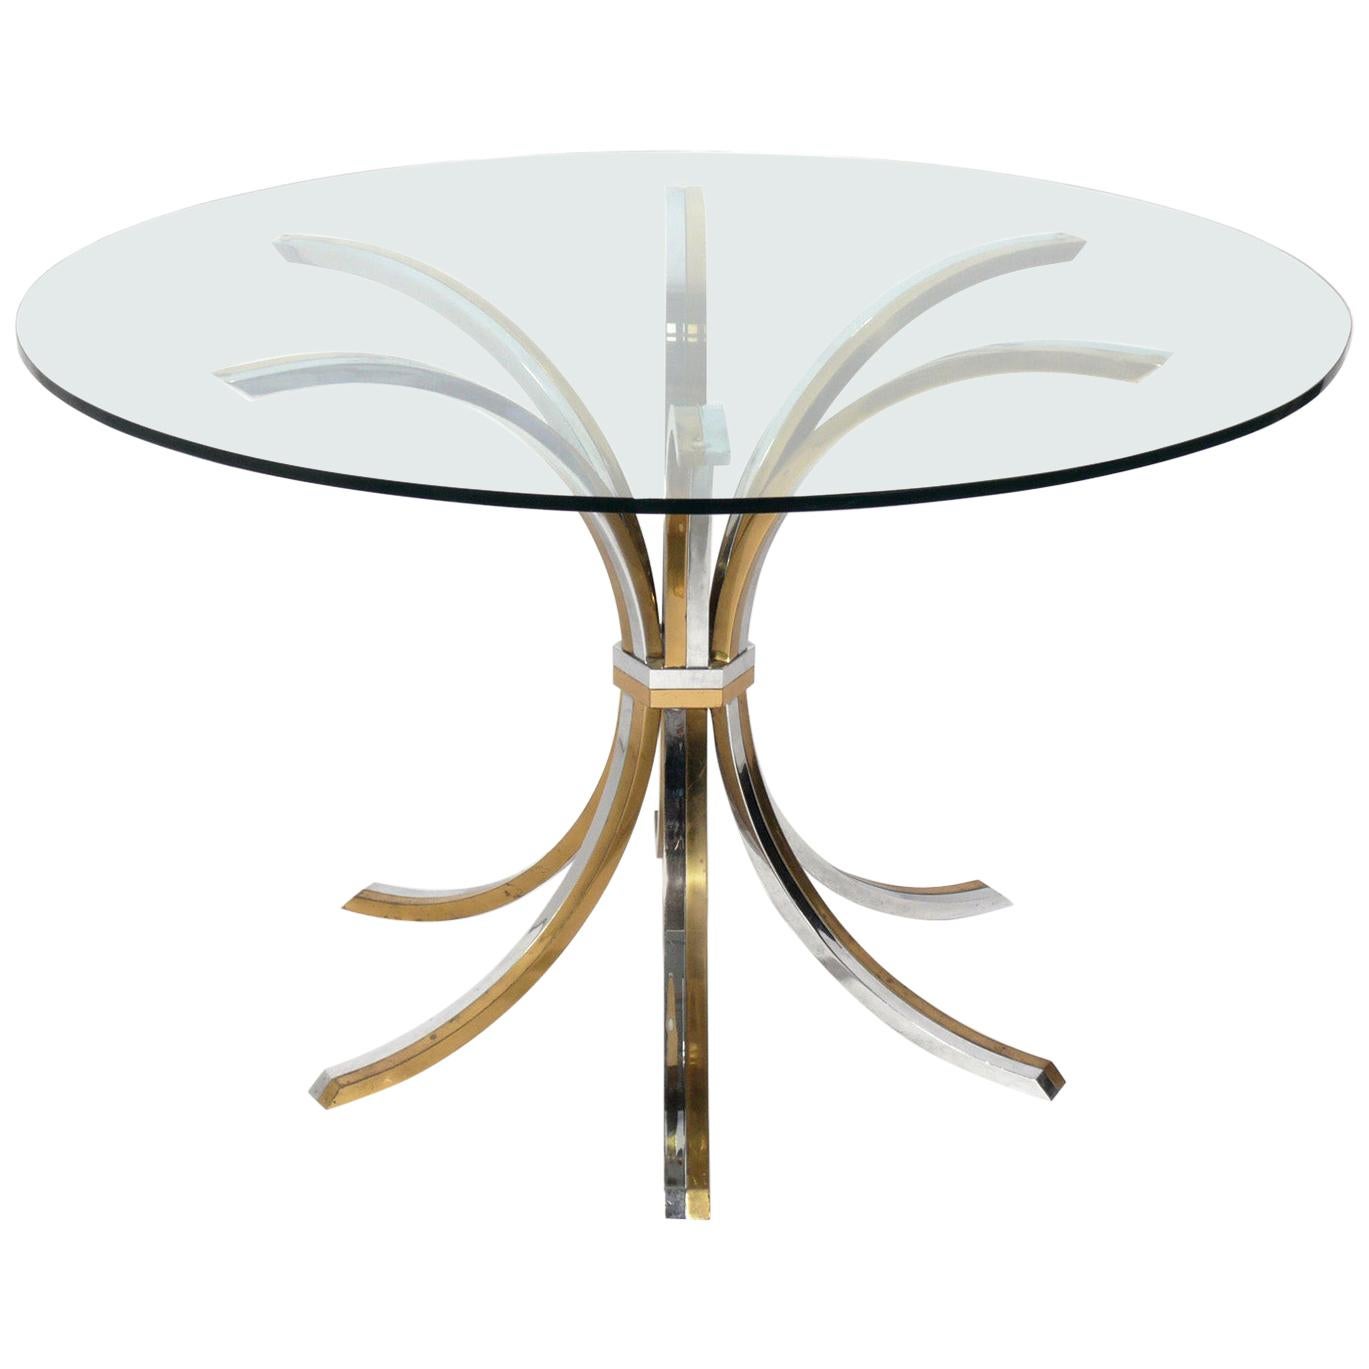 Brass and Chrome Center or Dining Table Attributed to Willy Rizzo